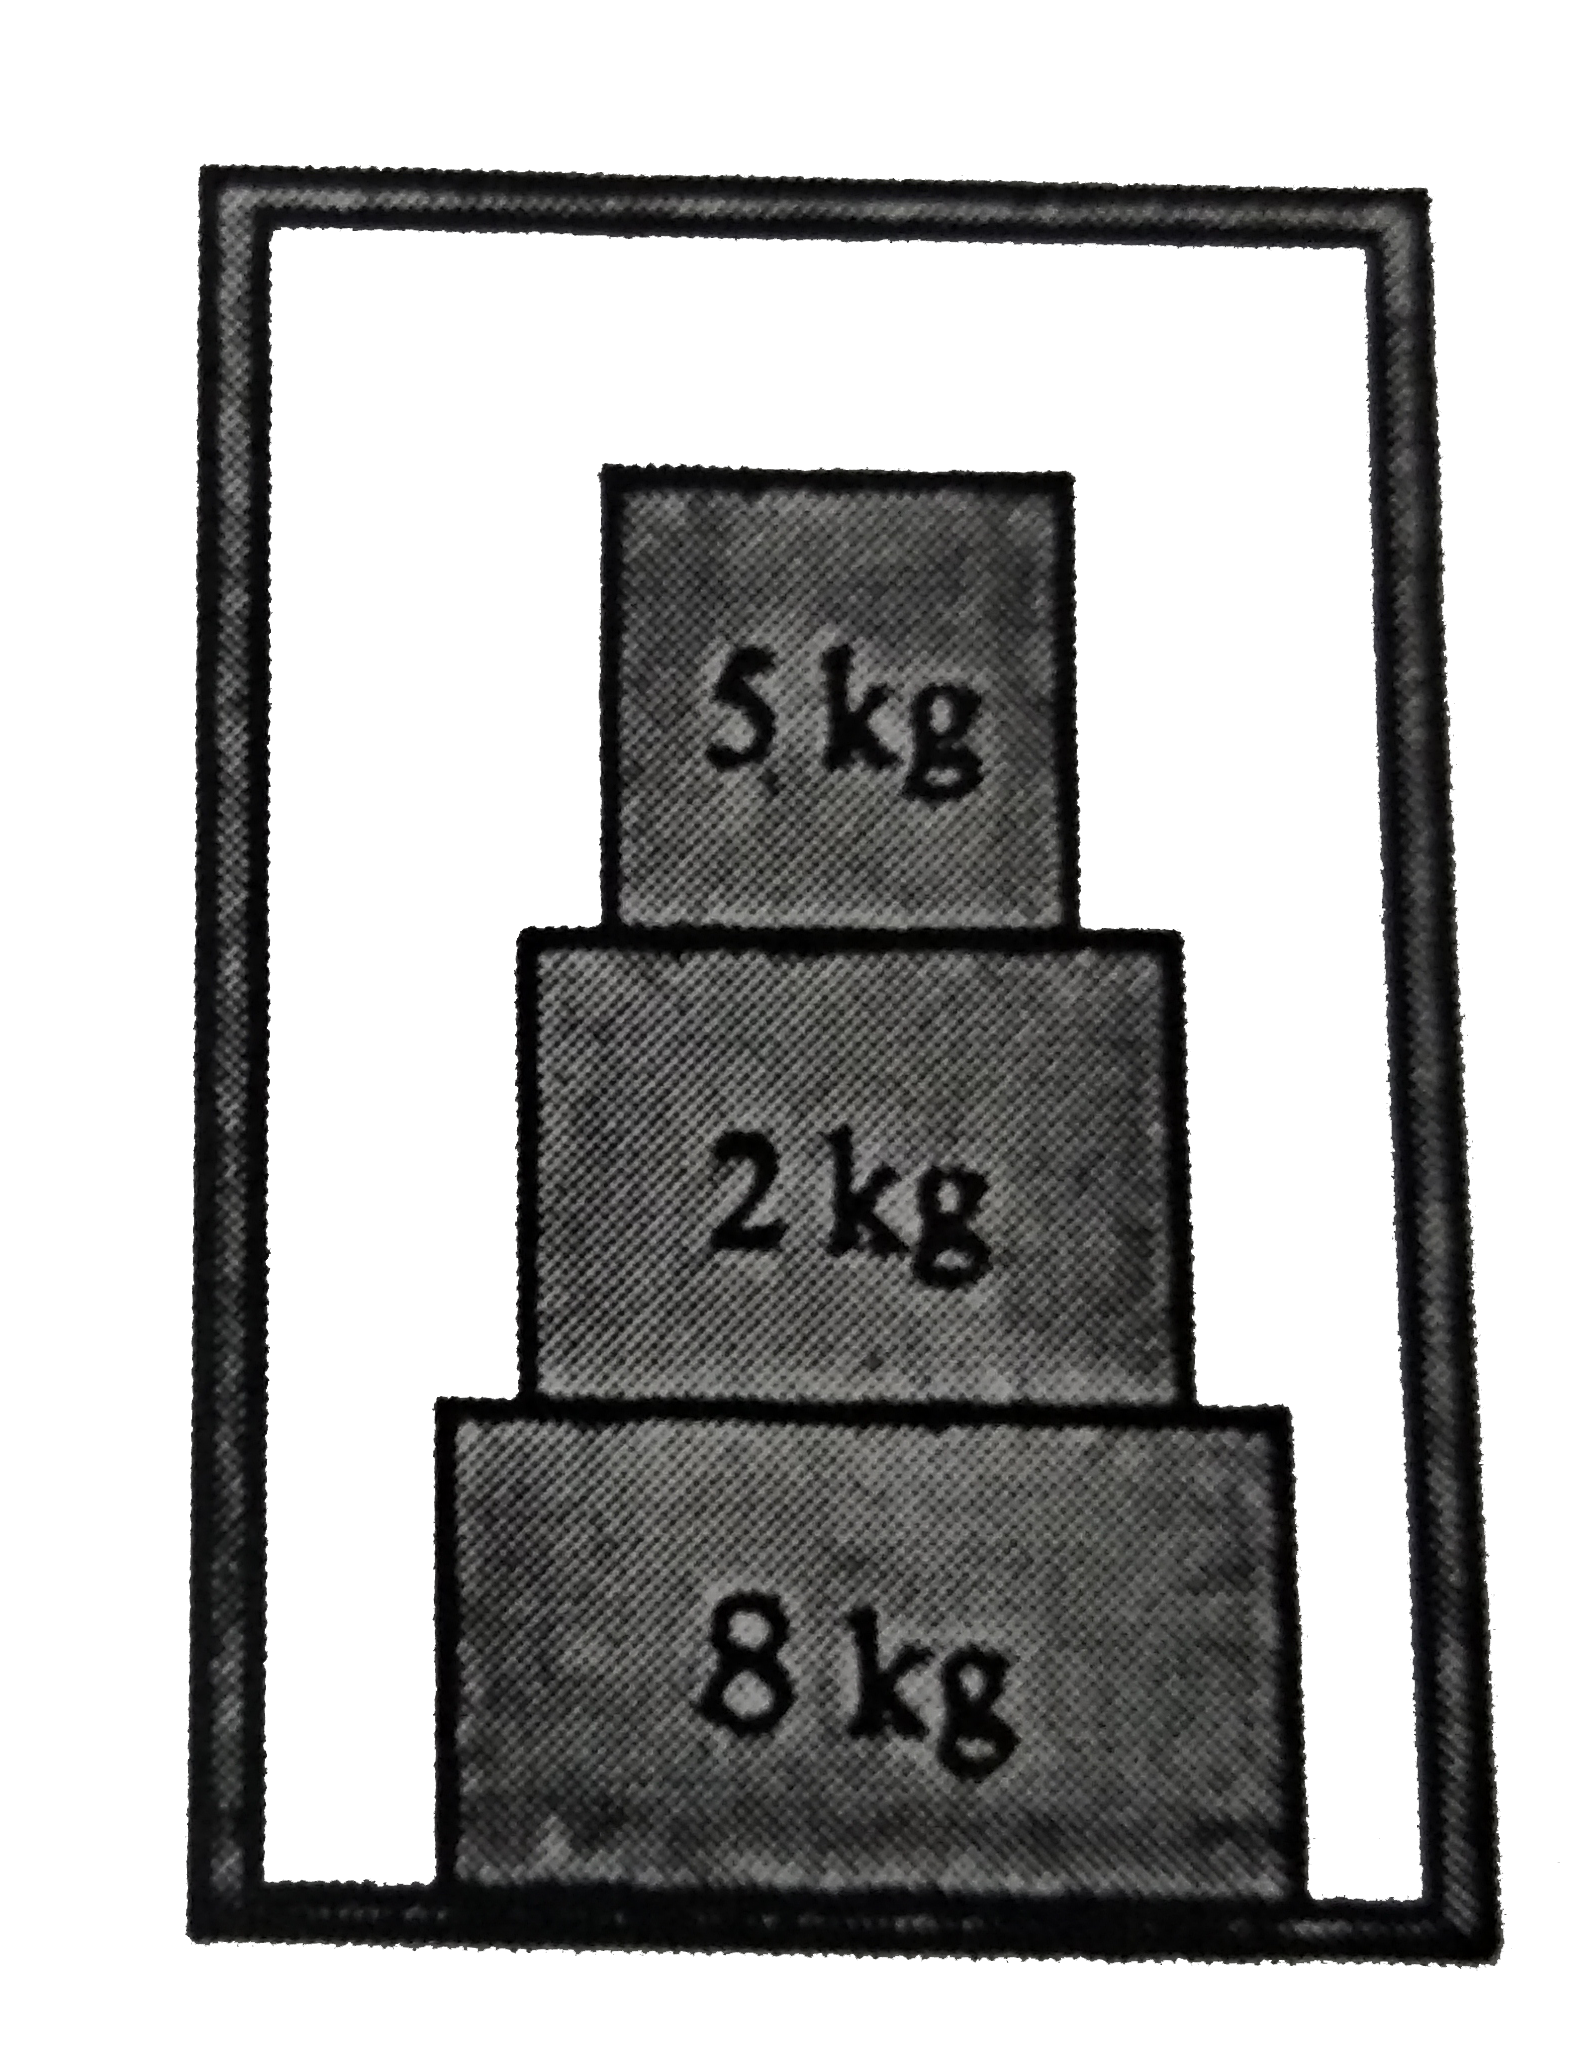 Three boxes are placed in a life. Wheen acceleration of the life is 4m//s^(2), the net force on the 8 kg box is closest to